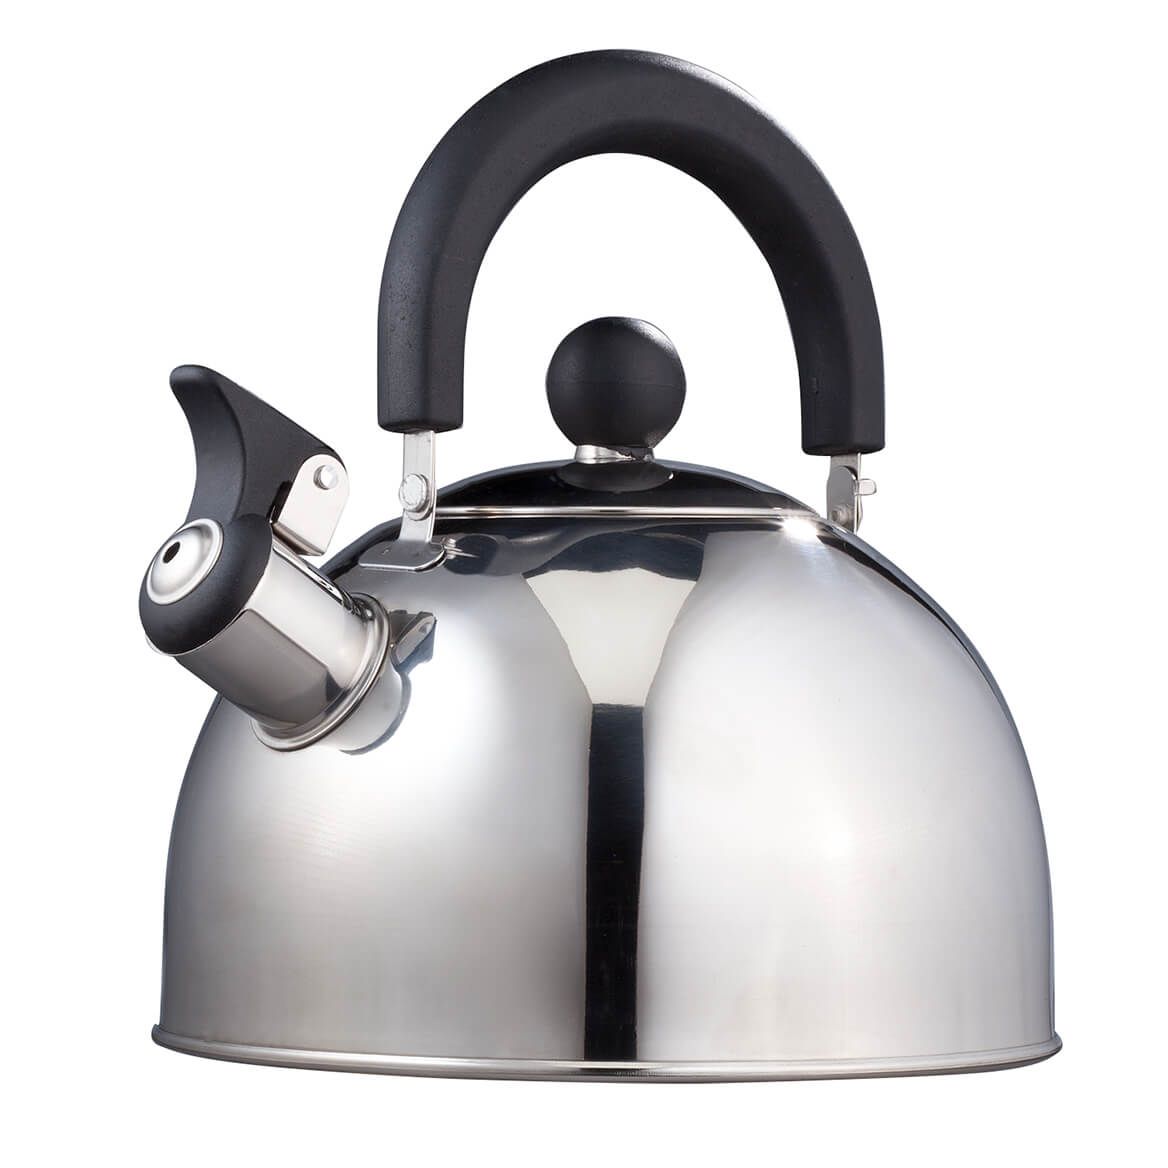 Stainless Steel Whistling Tea Kettle by Home-Style Kitchen™ + '-' + 353542